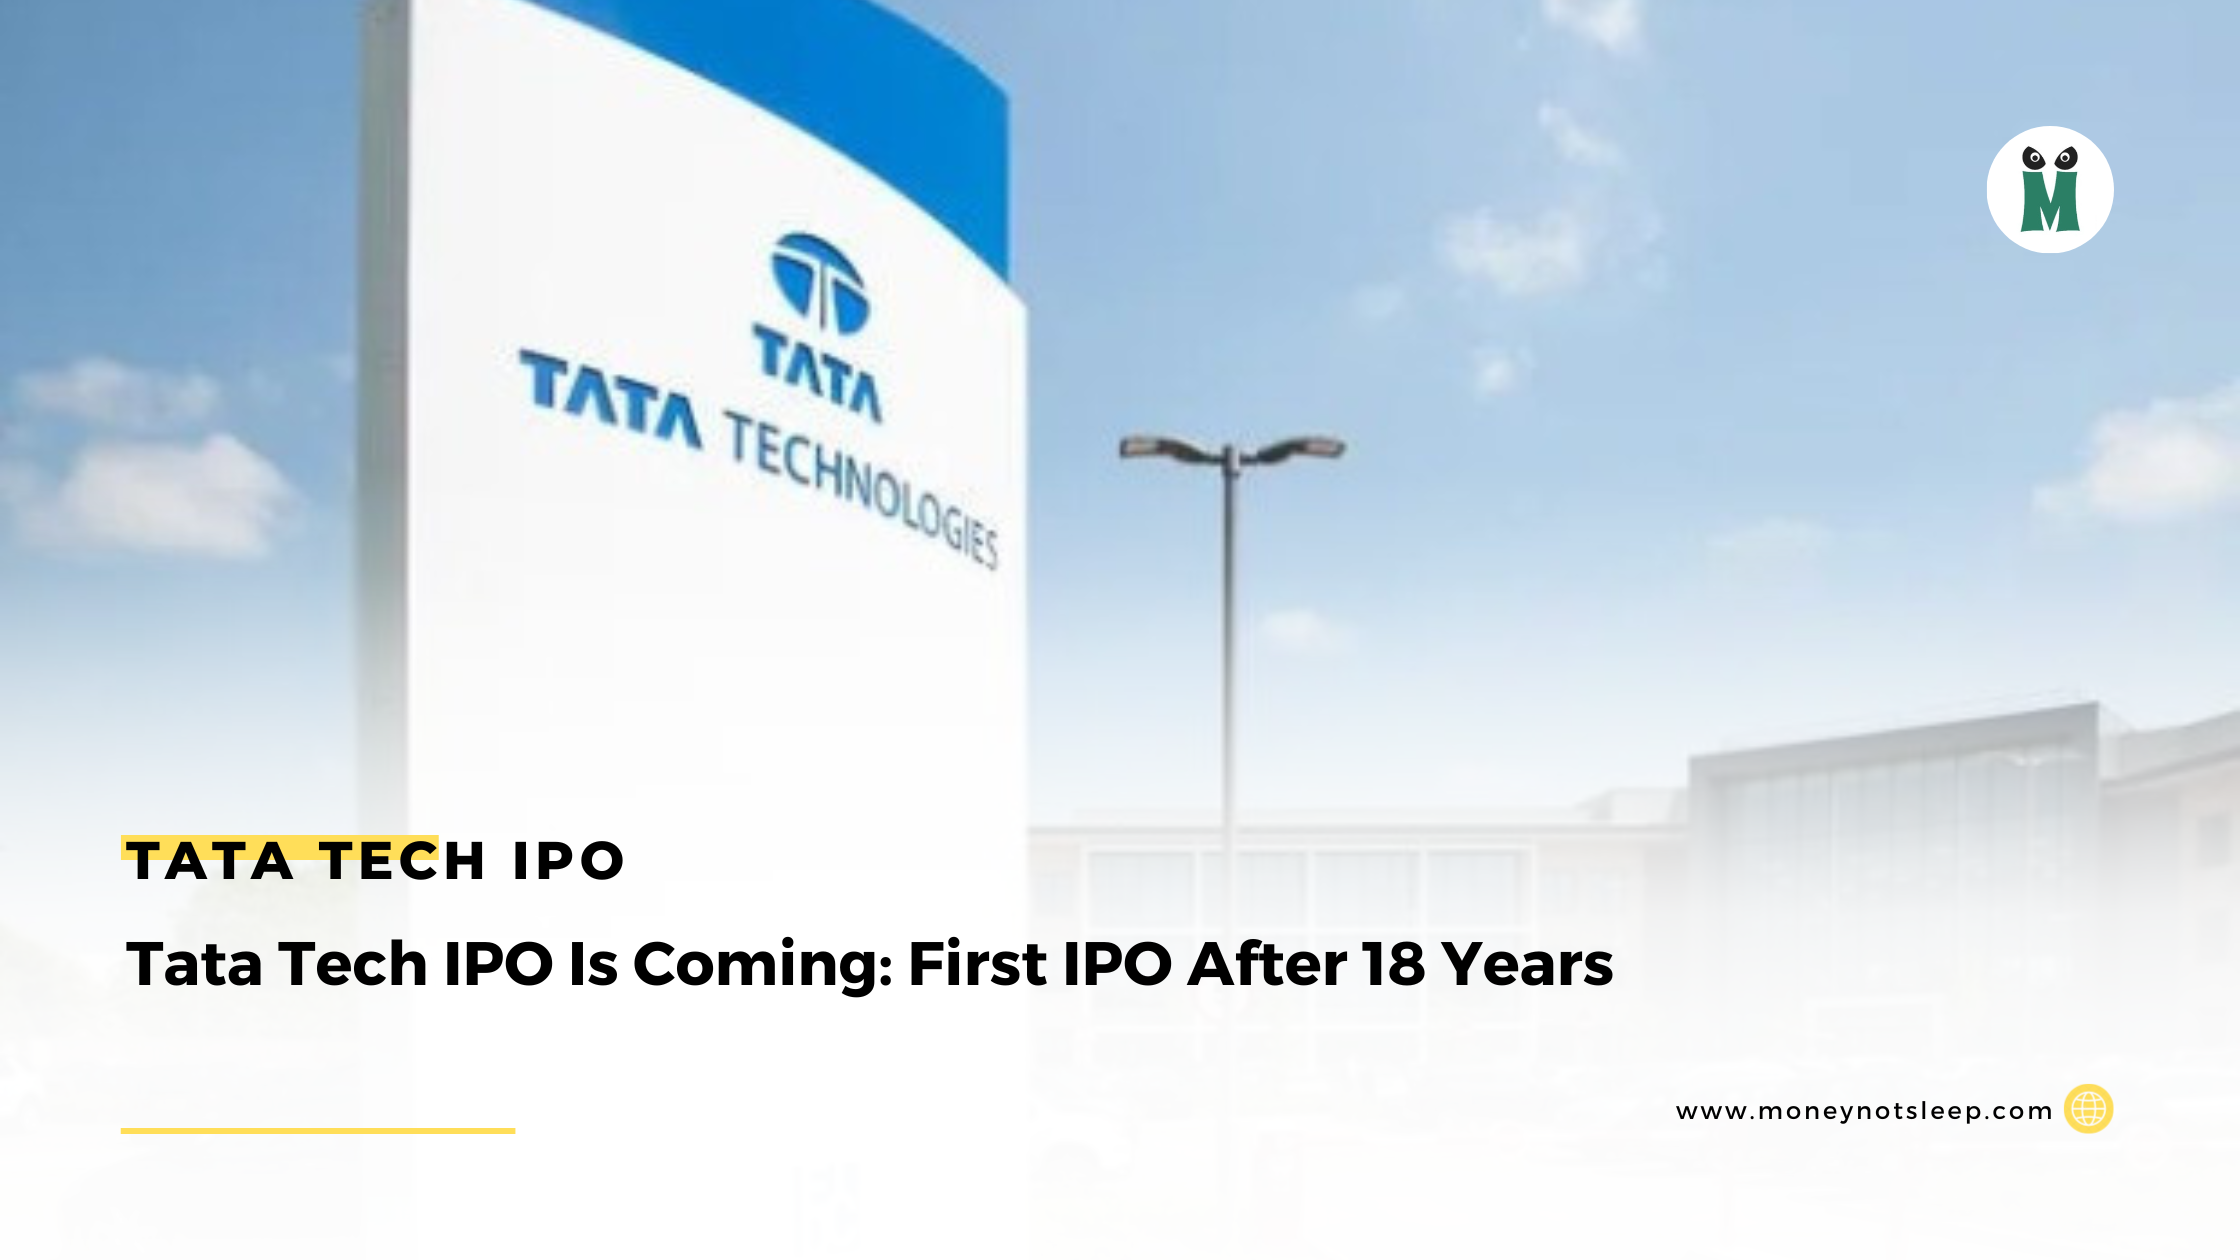 Tata Tech IPO Is Coming: First IPO After 18 Years